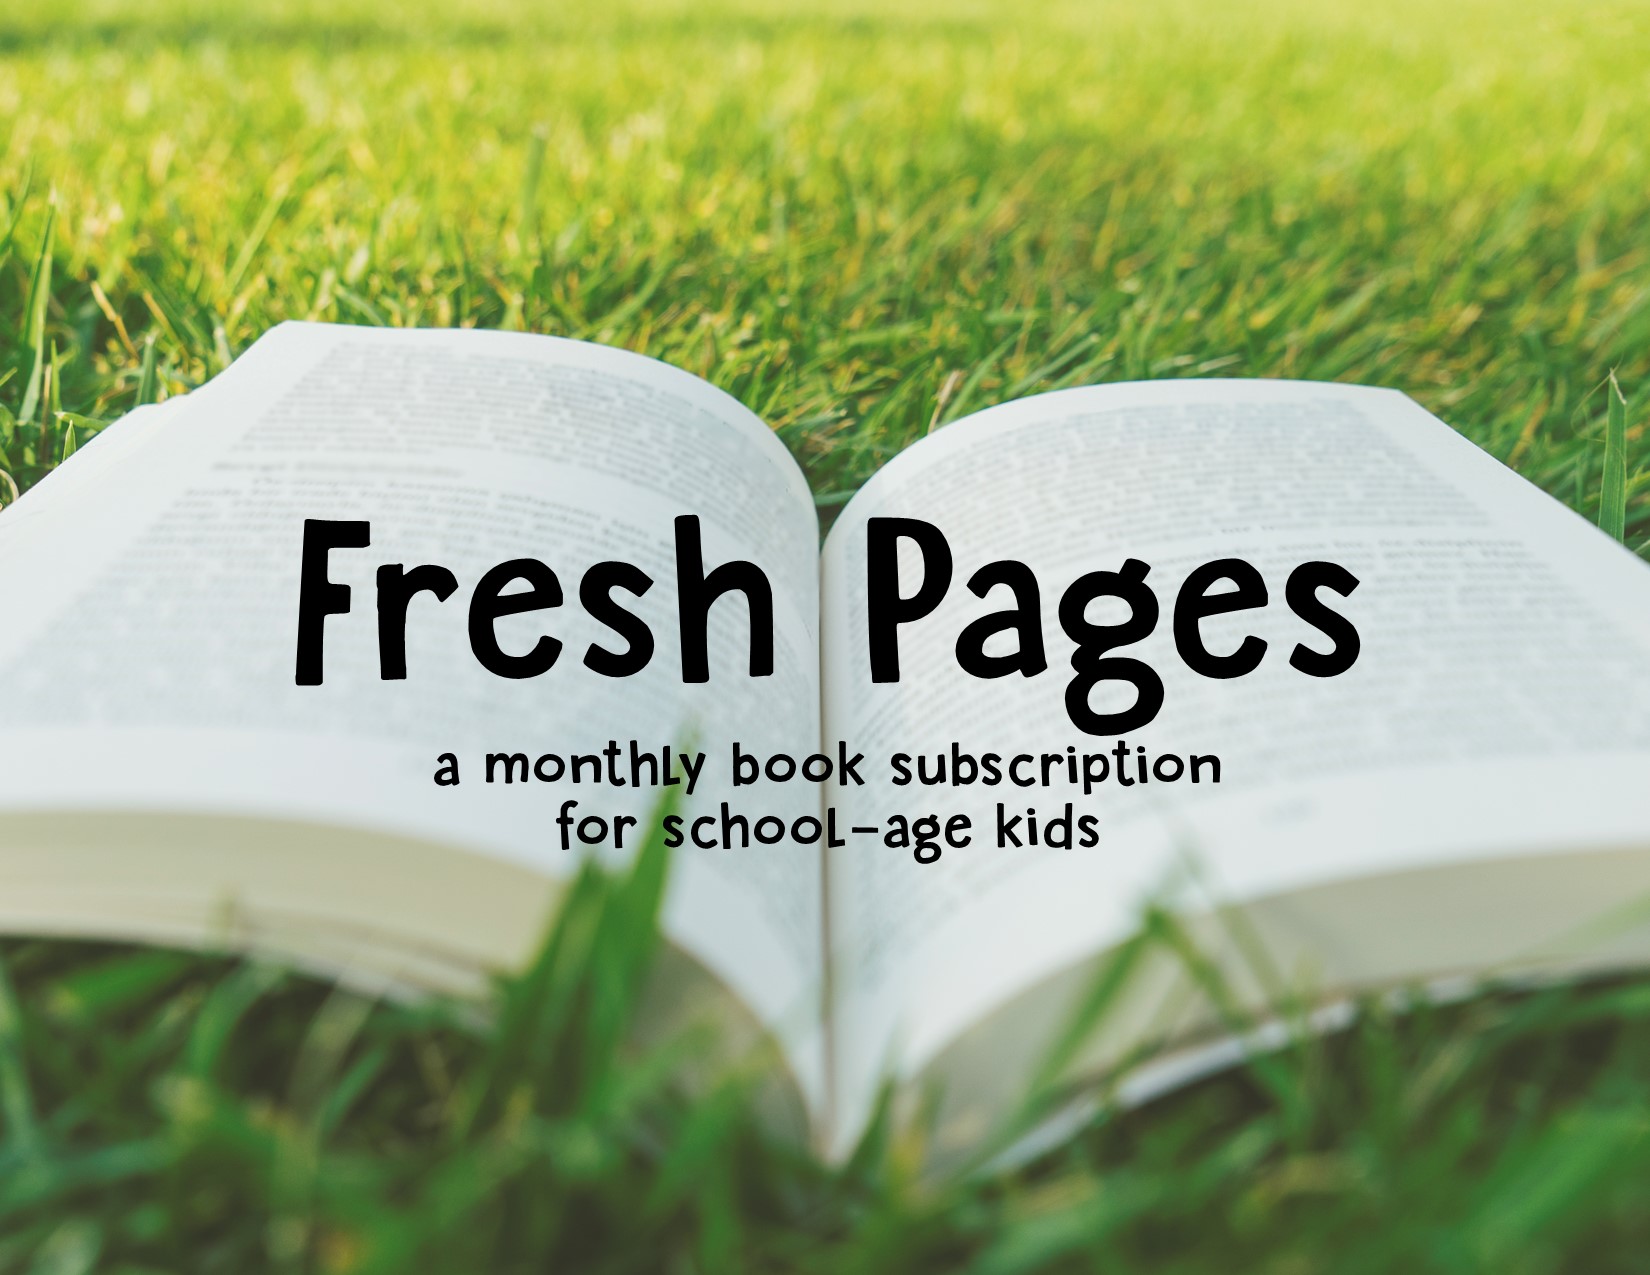 Fresh pages